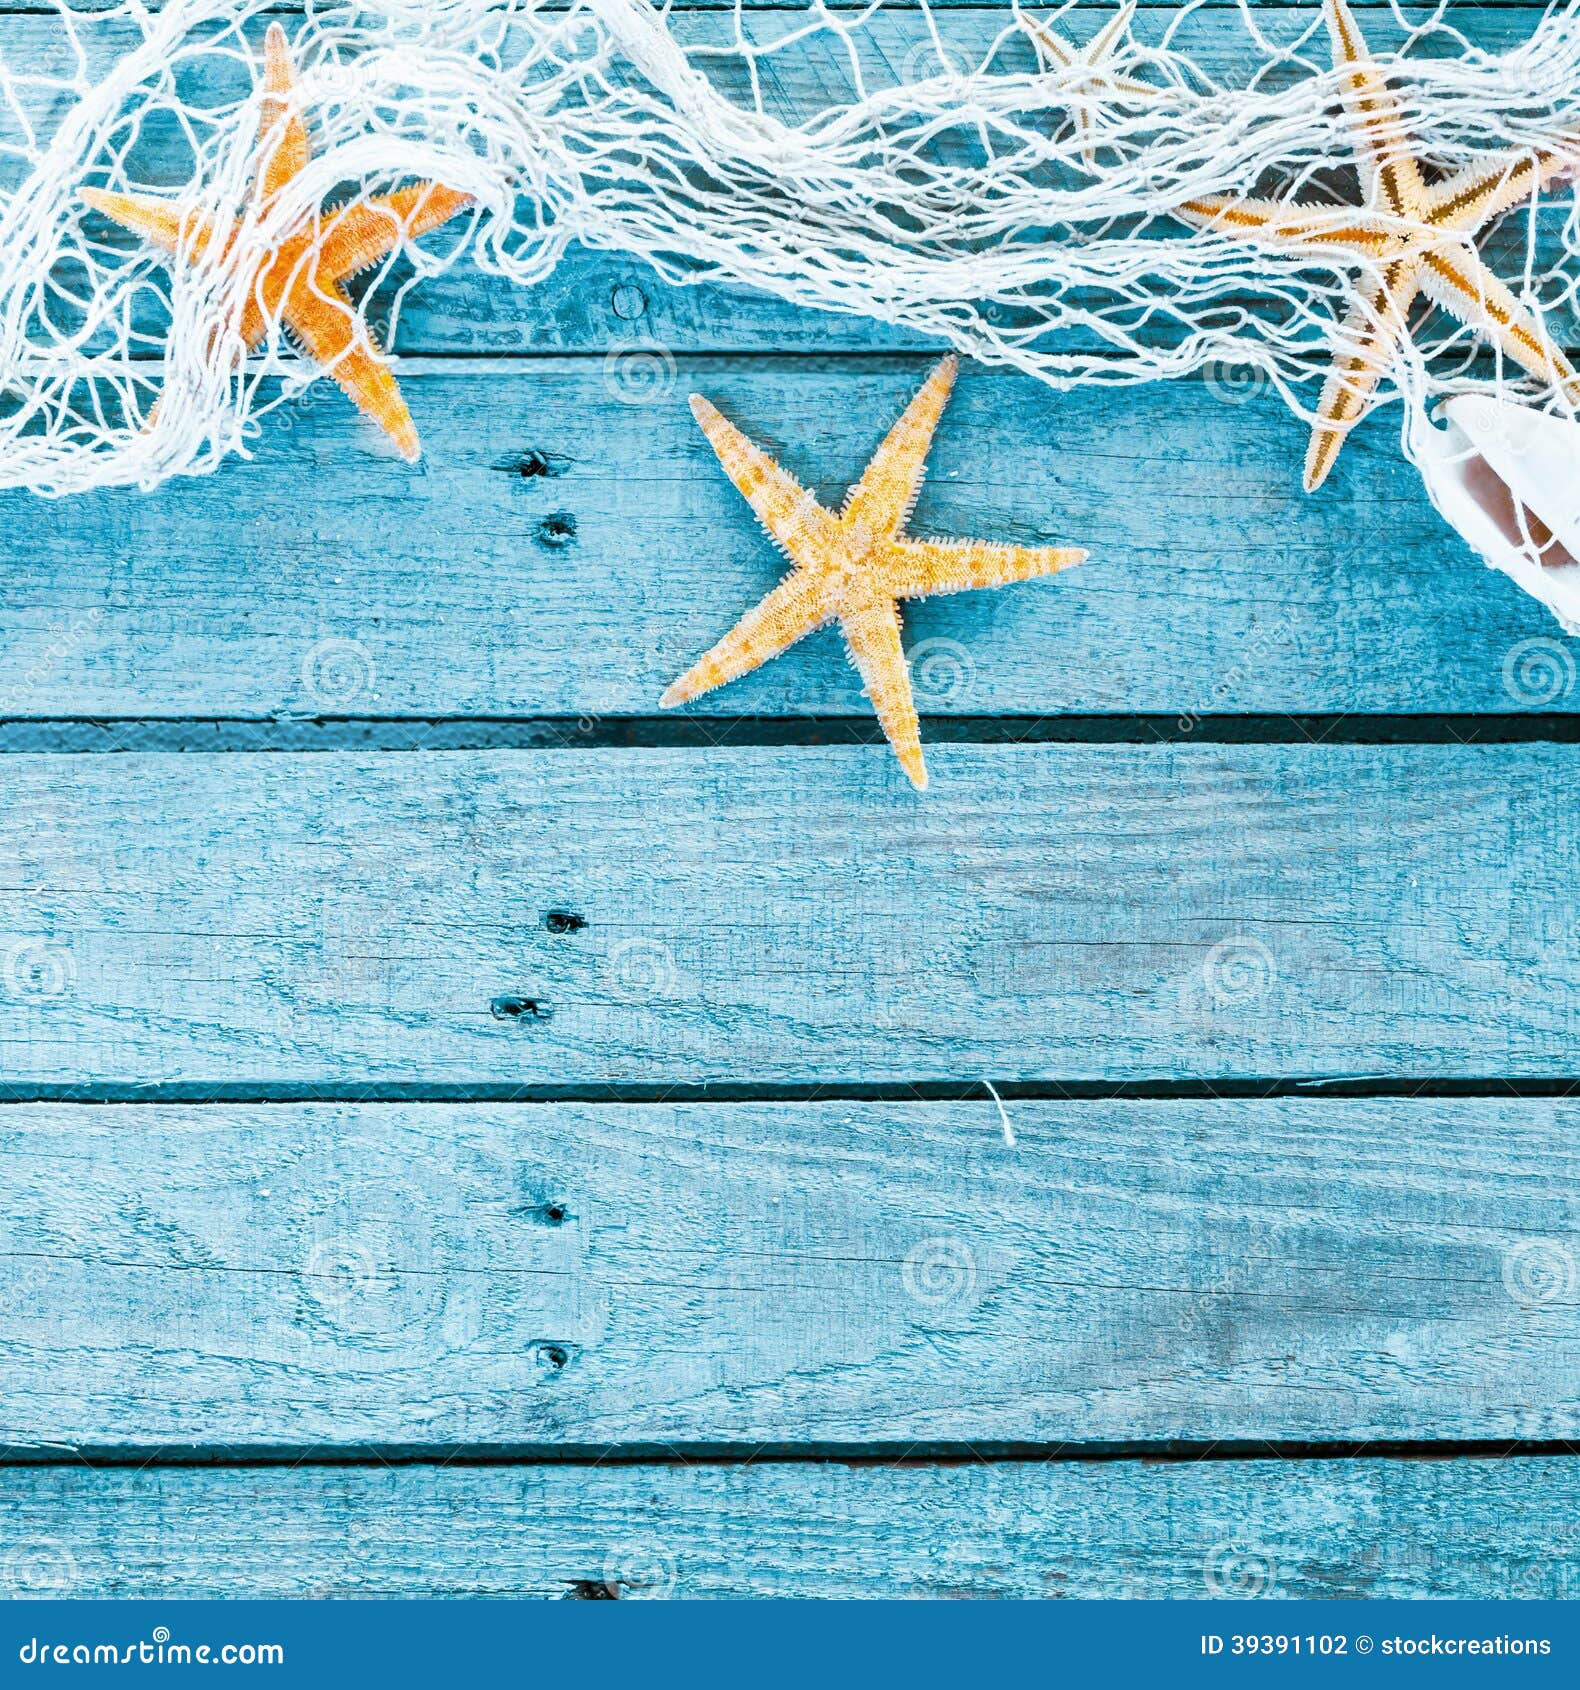 Yeele 15x8ft Vinyl Summer Party Backdrop for Photography Nautical Style Blue Wooden Board Starfish Shell Sunglasses Photo Background Party Banner Decoration Photo Booth Shoot Studio Props